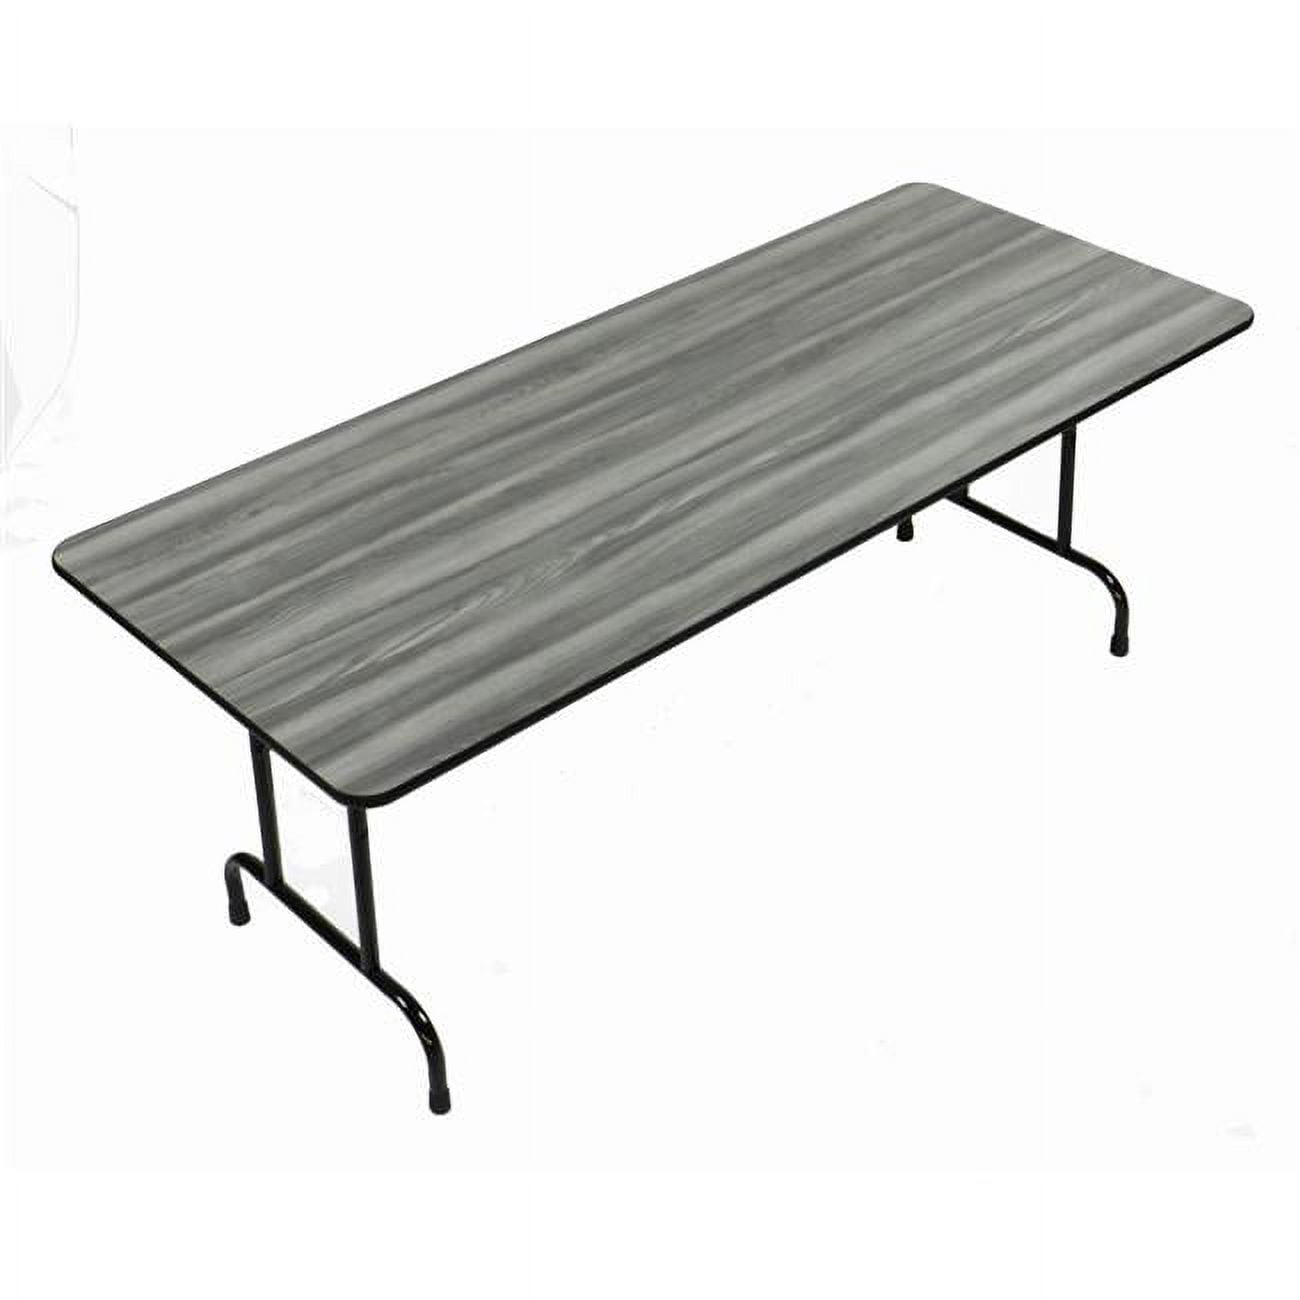 Cf3072px-52 0.75 In. High Pressure Rectangular Top Folding Tables, New England Driftwood - 30 X 72 In.